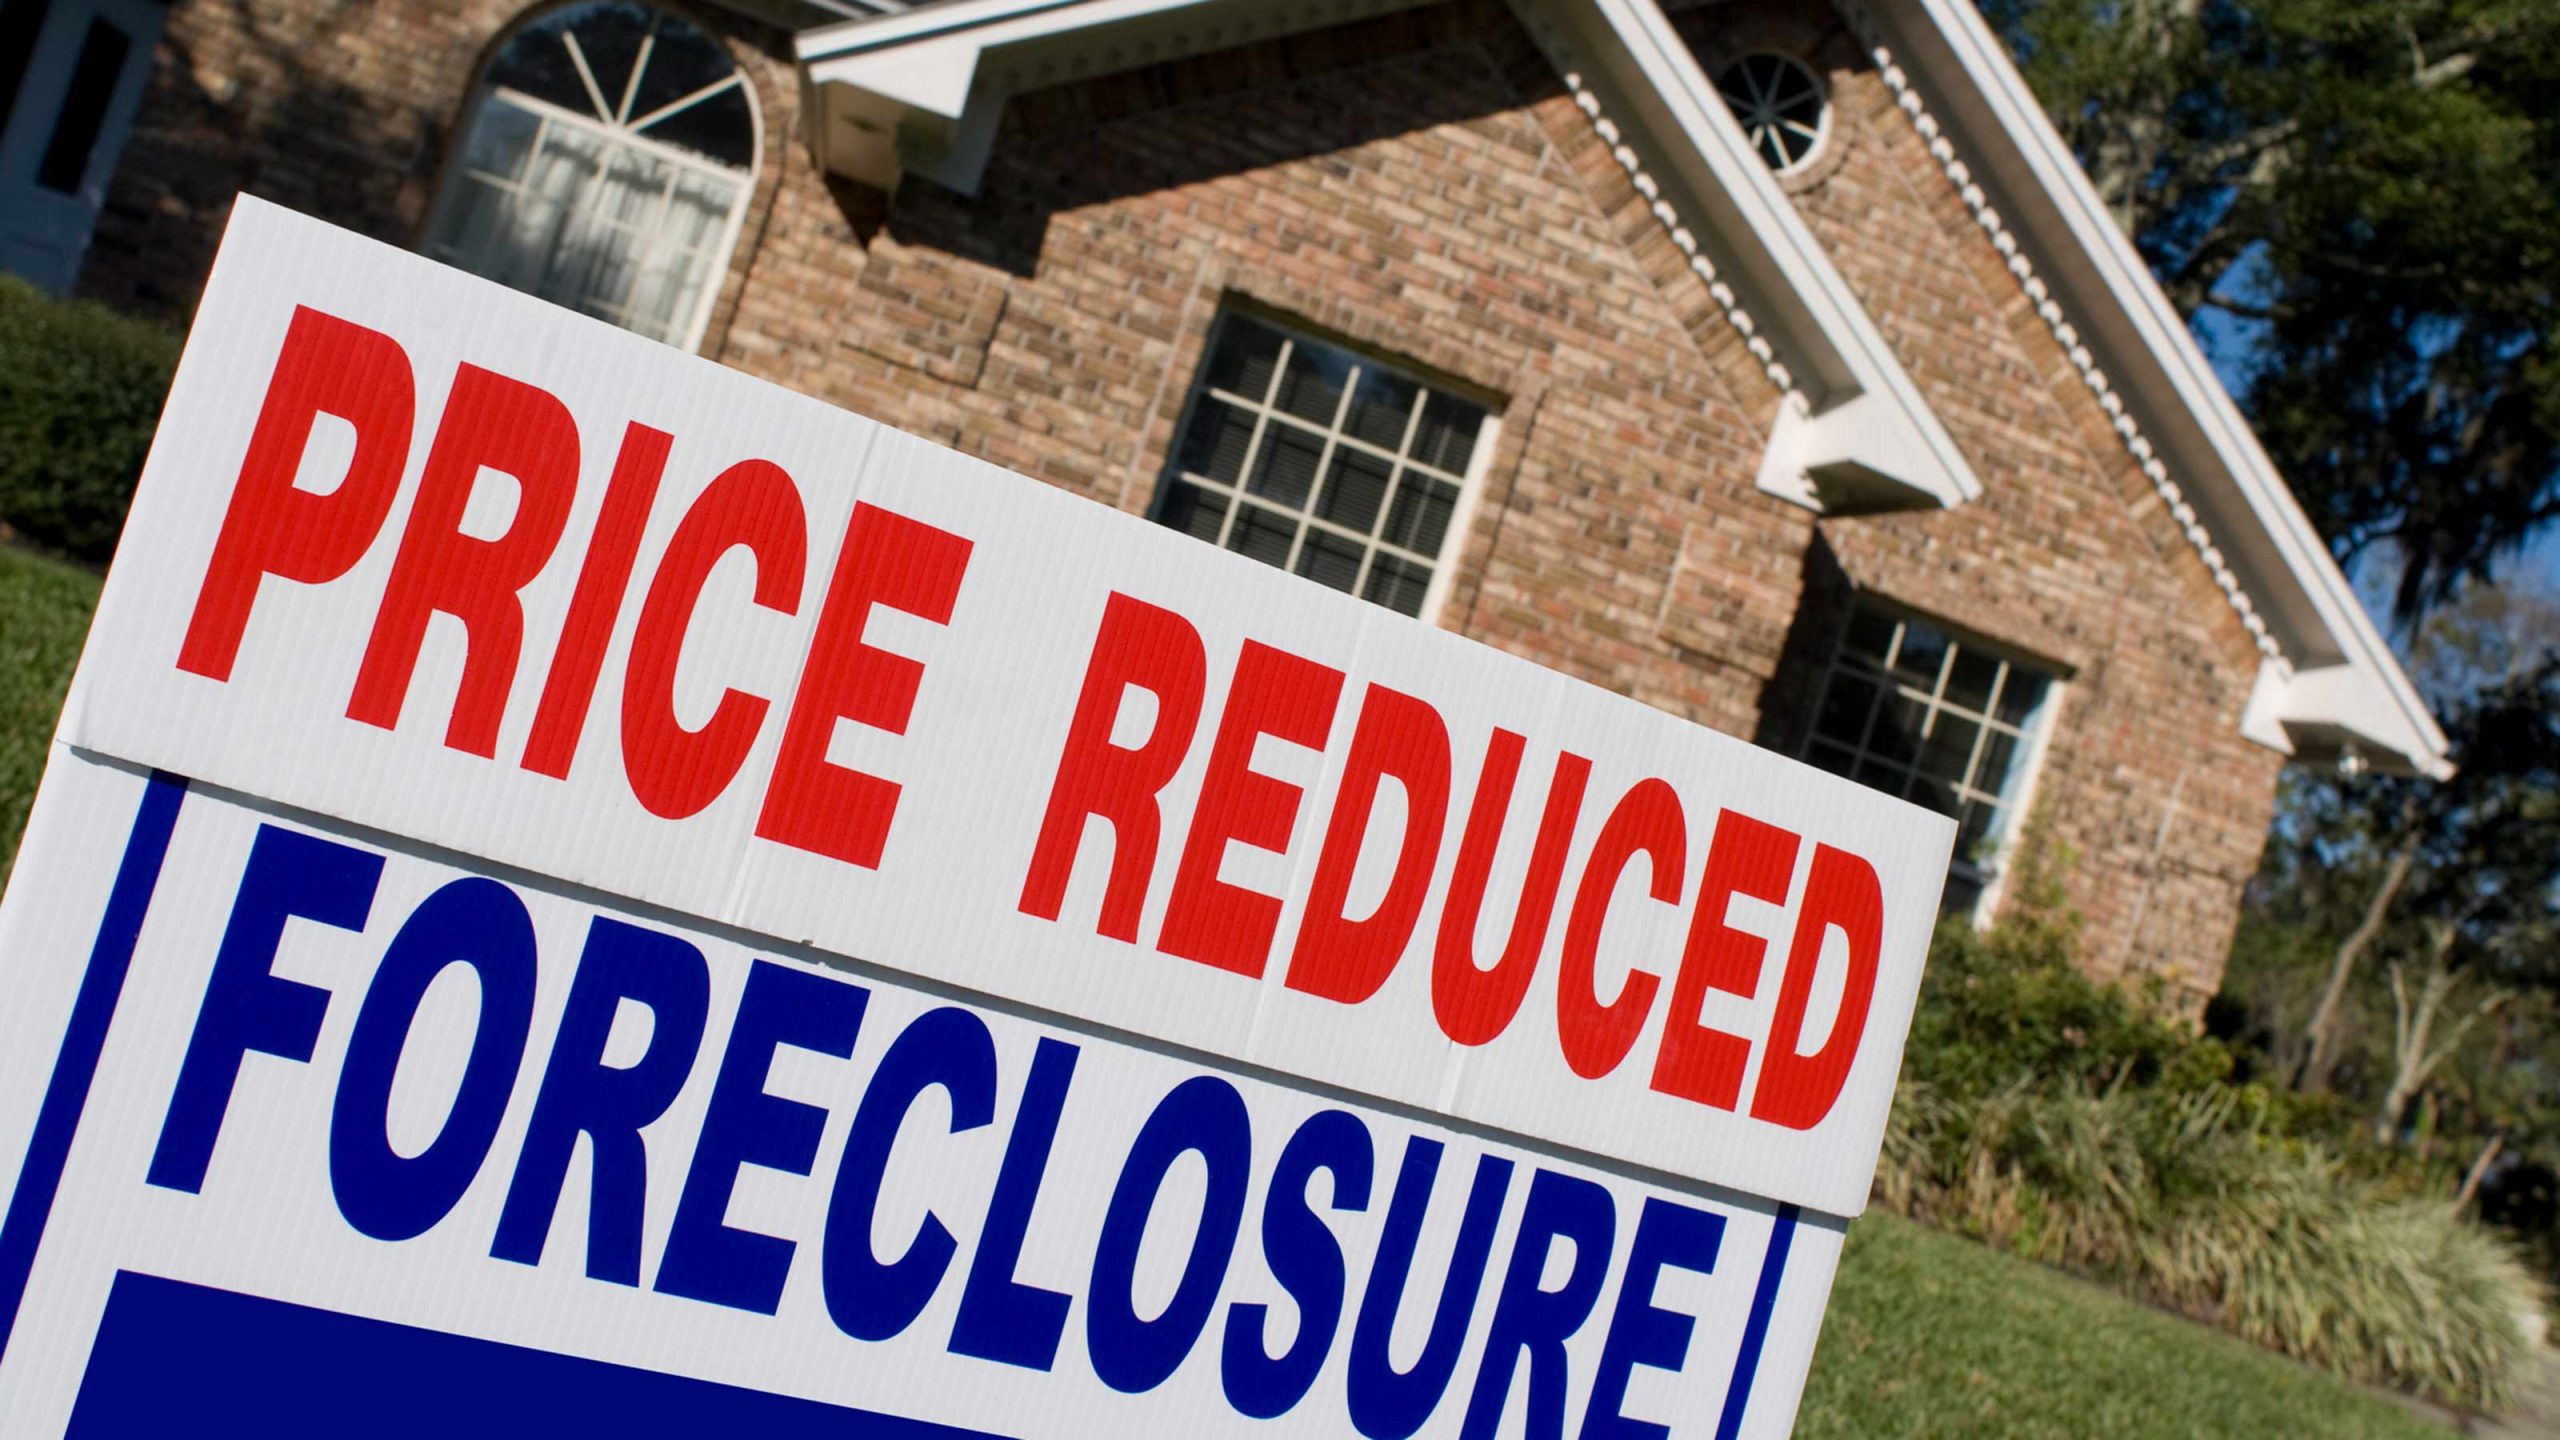 How to Buy Foreclosed Homes in Florida